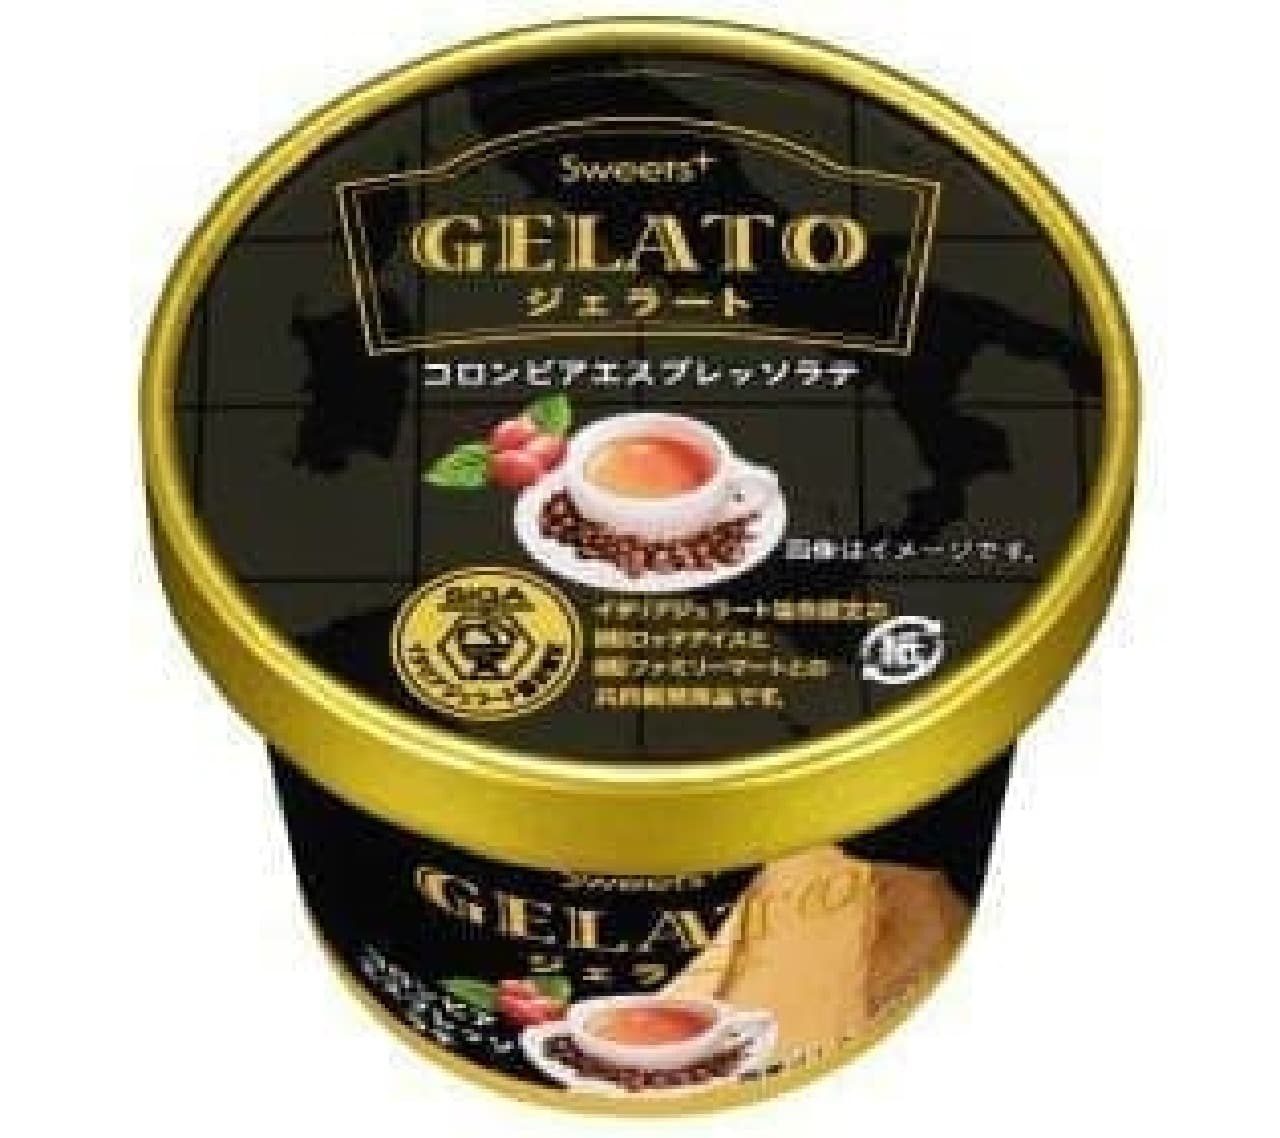 How about an "adult" gelato that is perfect for autumn?